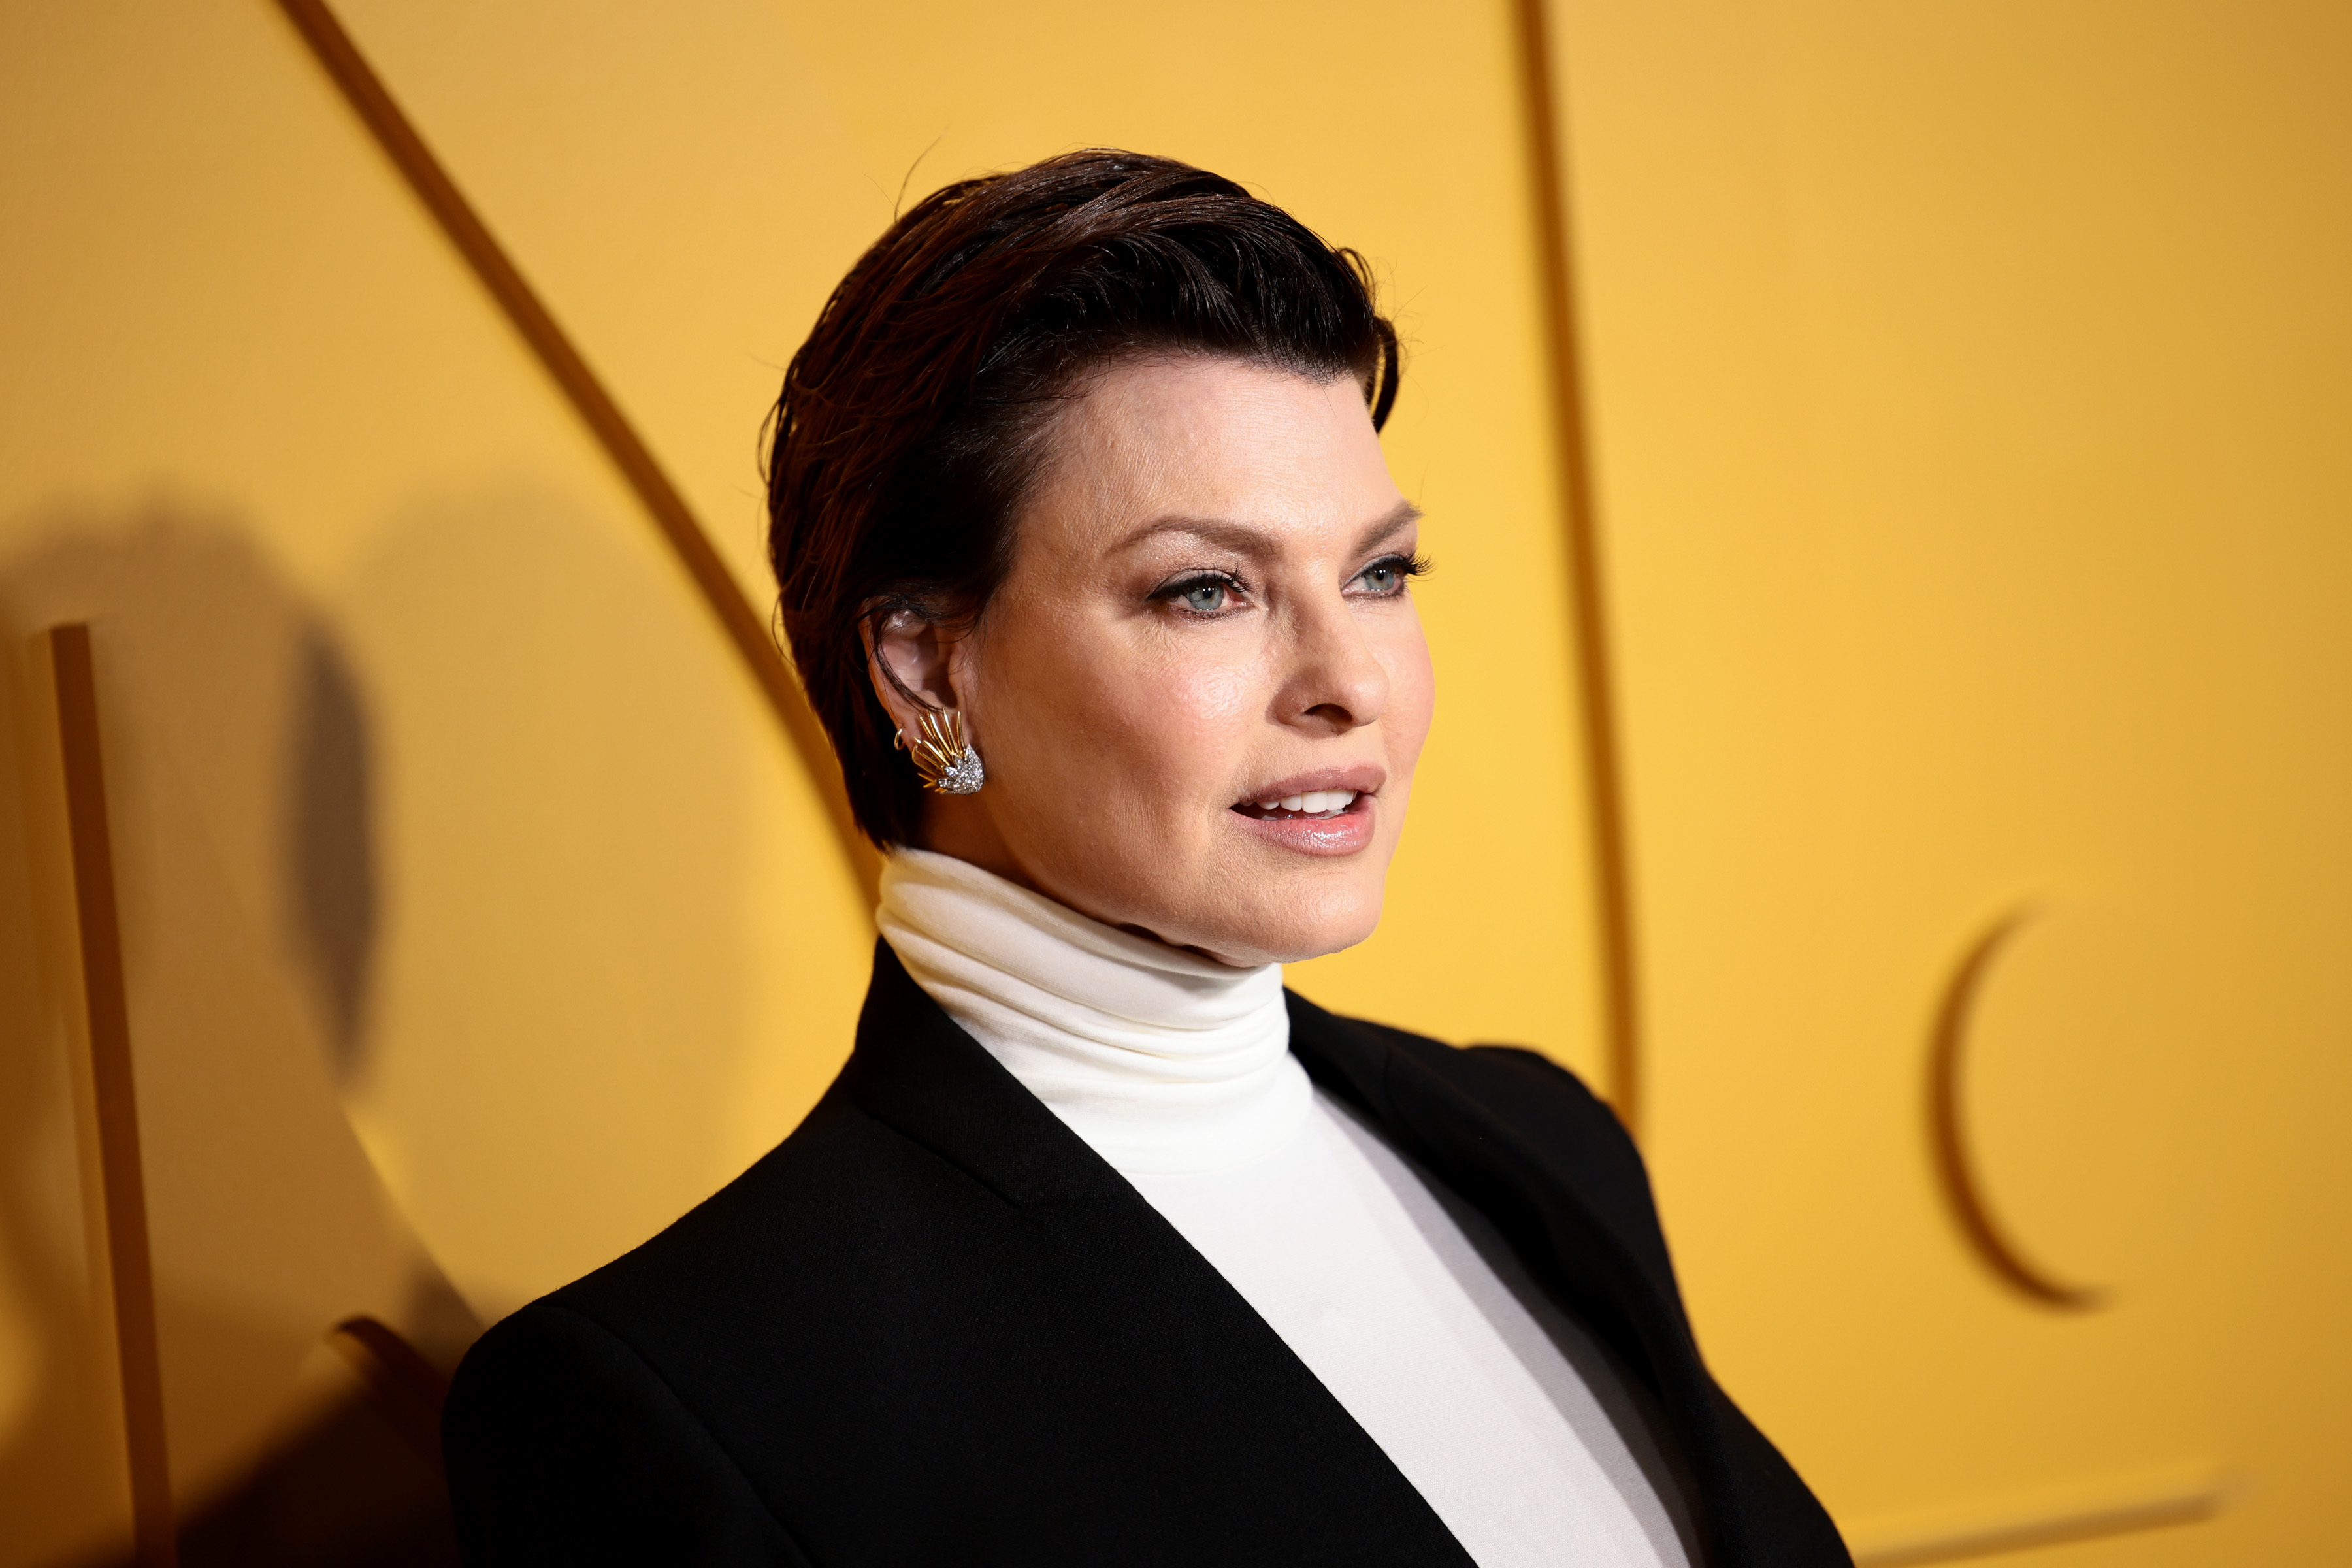 Linda Evangelista says she hasn't dated since before CoolSculpting
incident